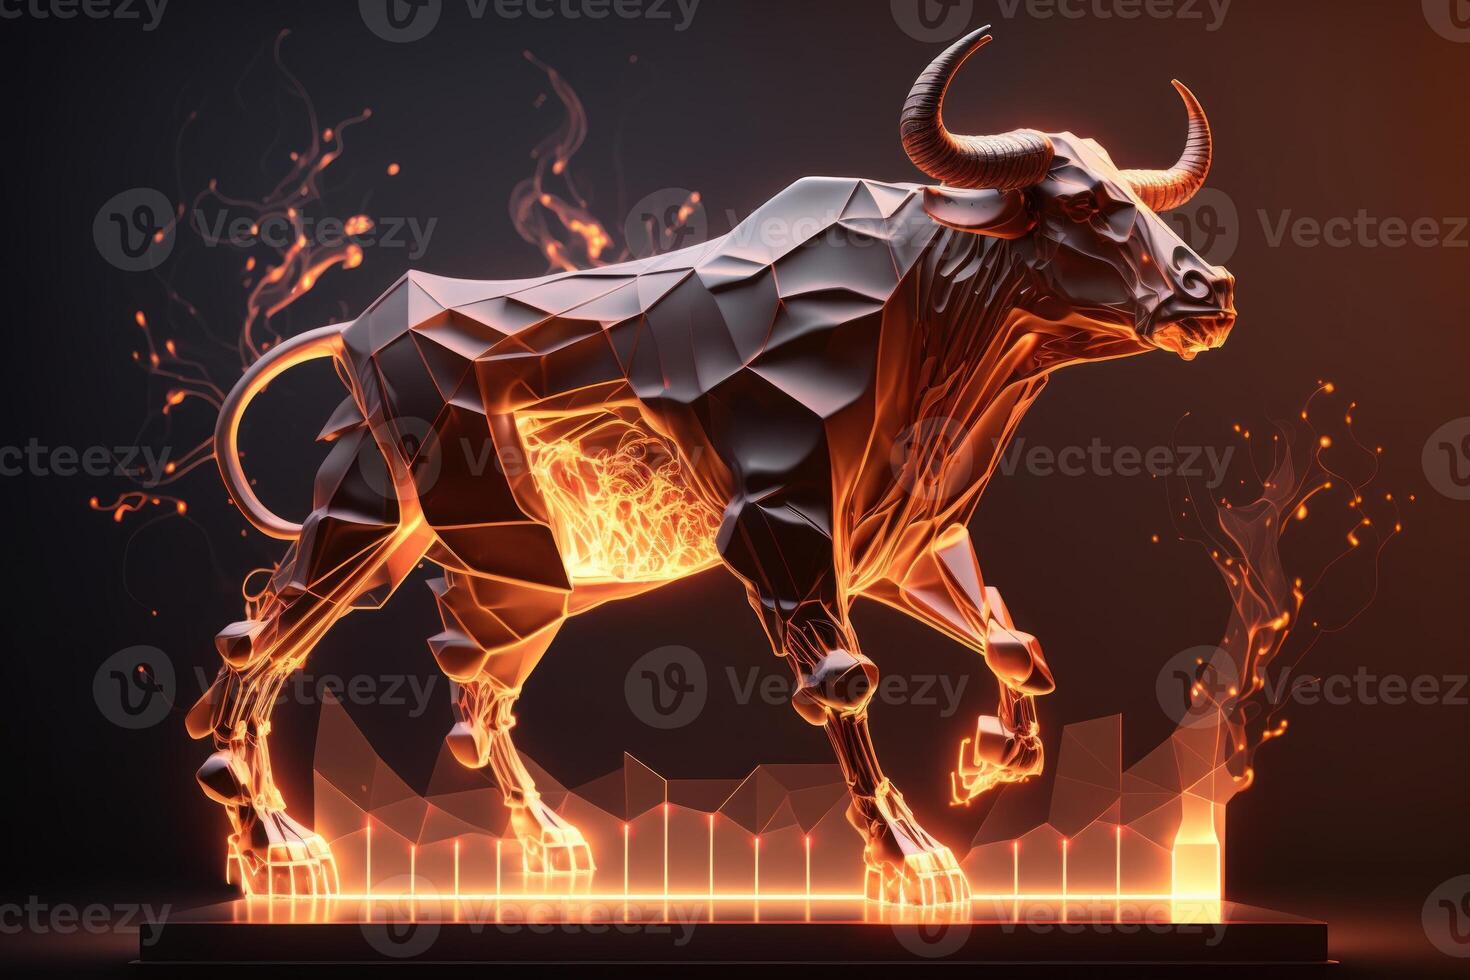 Fire sculpture of Bull, Bullish divergence in Stock market and Crypto currency. Created photo